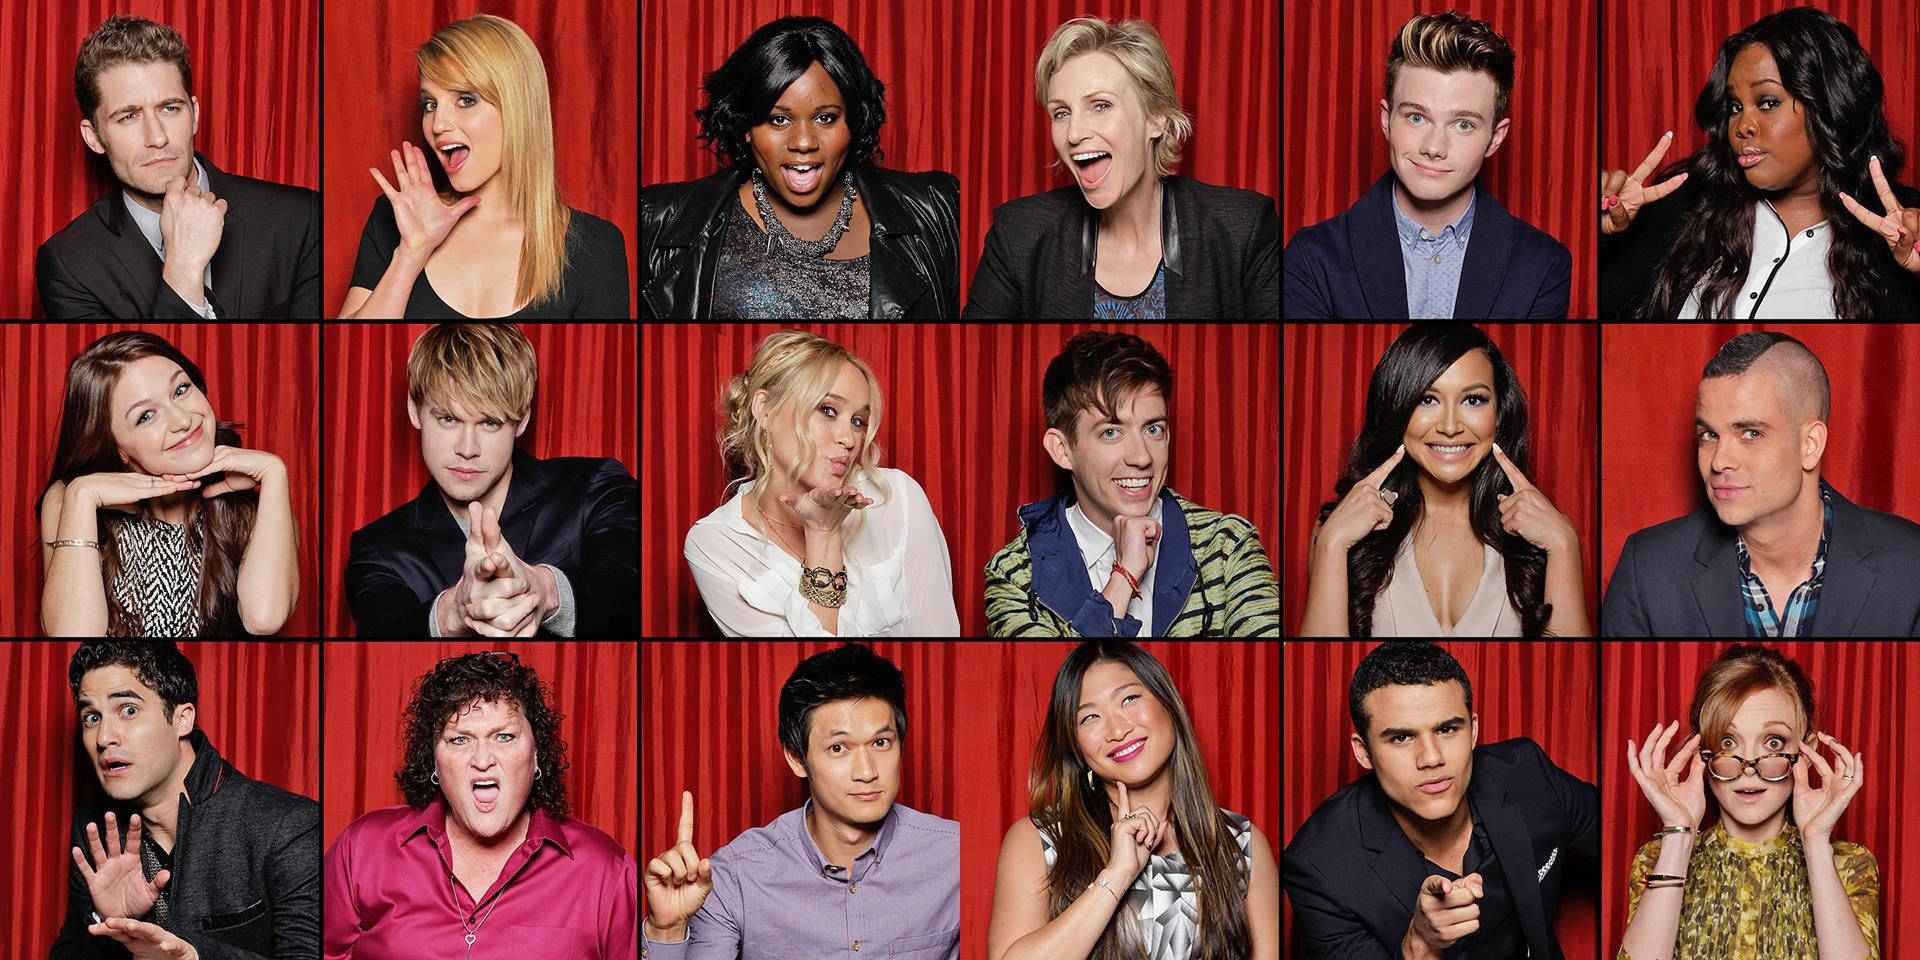 Engaging Glee Cast Against a Theatrical Red Drape Wallpaper